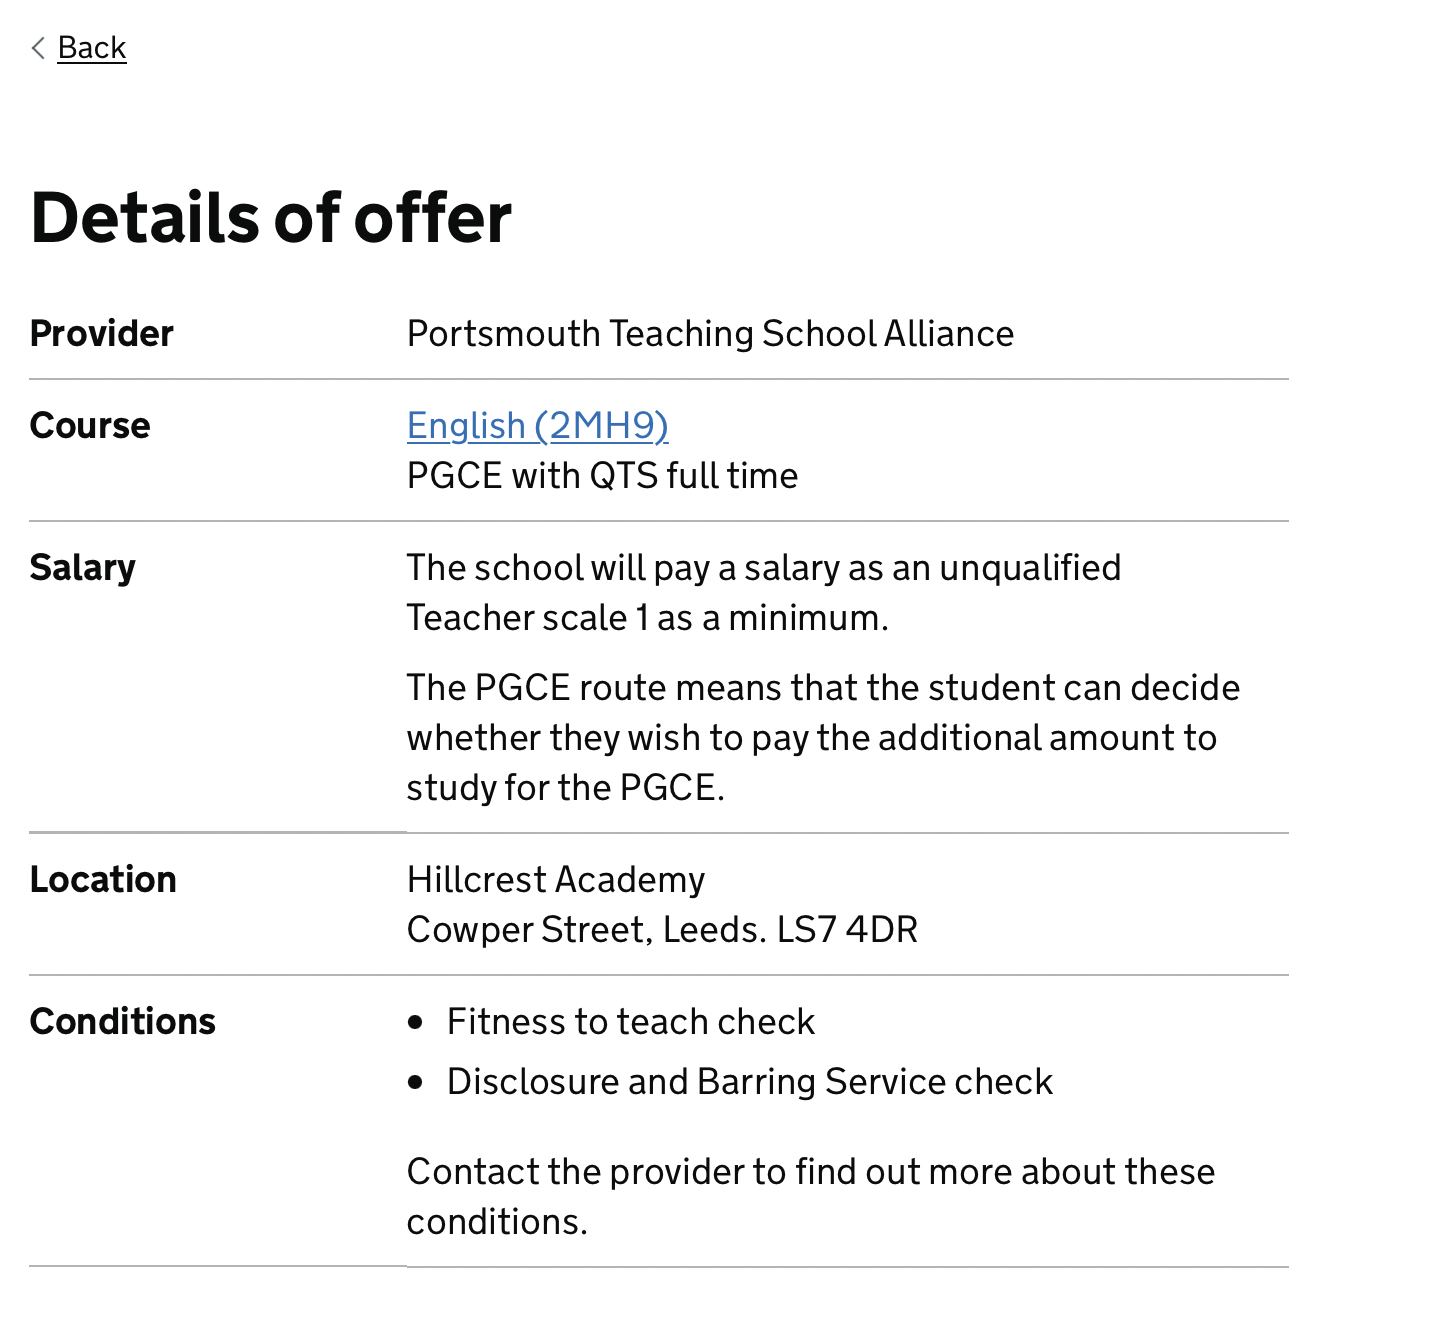 Screenshot showing a ‘Details of offer’ heading, under which the salary is listed as “The school will pay the salary as an unqualified teacher scale 1 as a minium.”